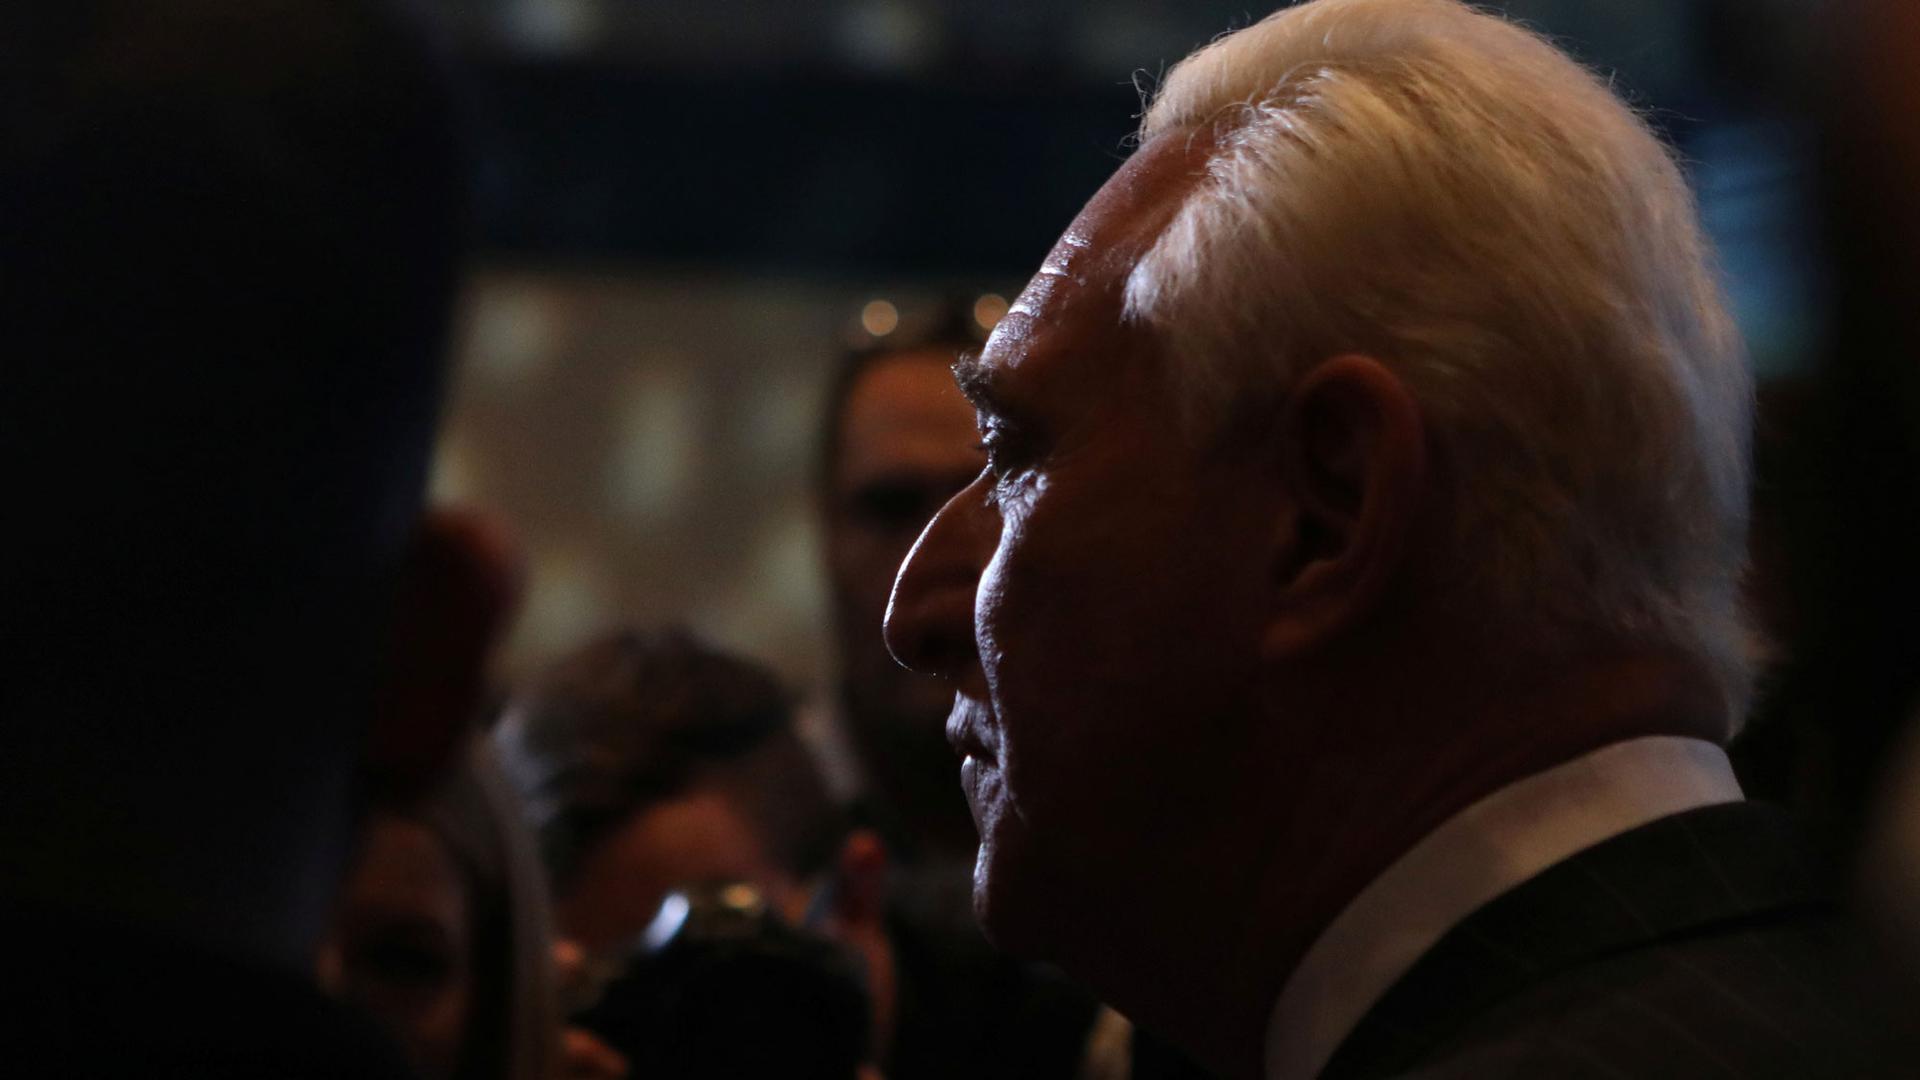 Political operative Roger Stone is shown in a profile portrait in high contrast.